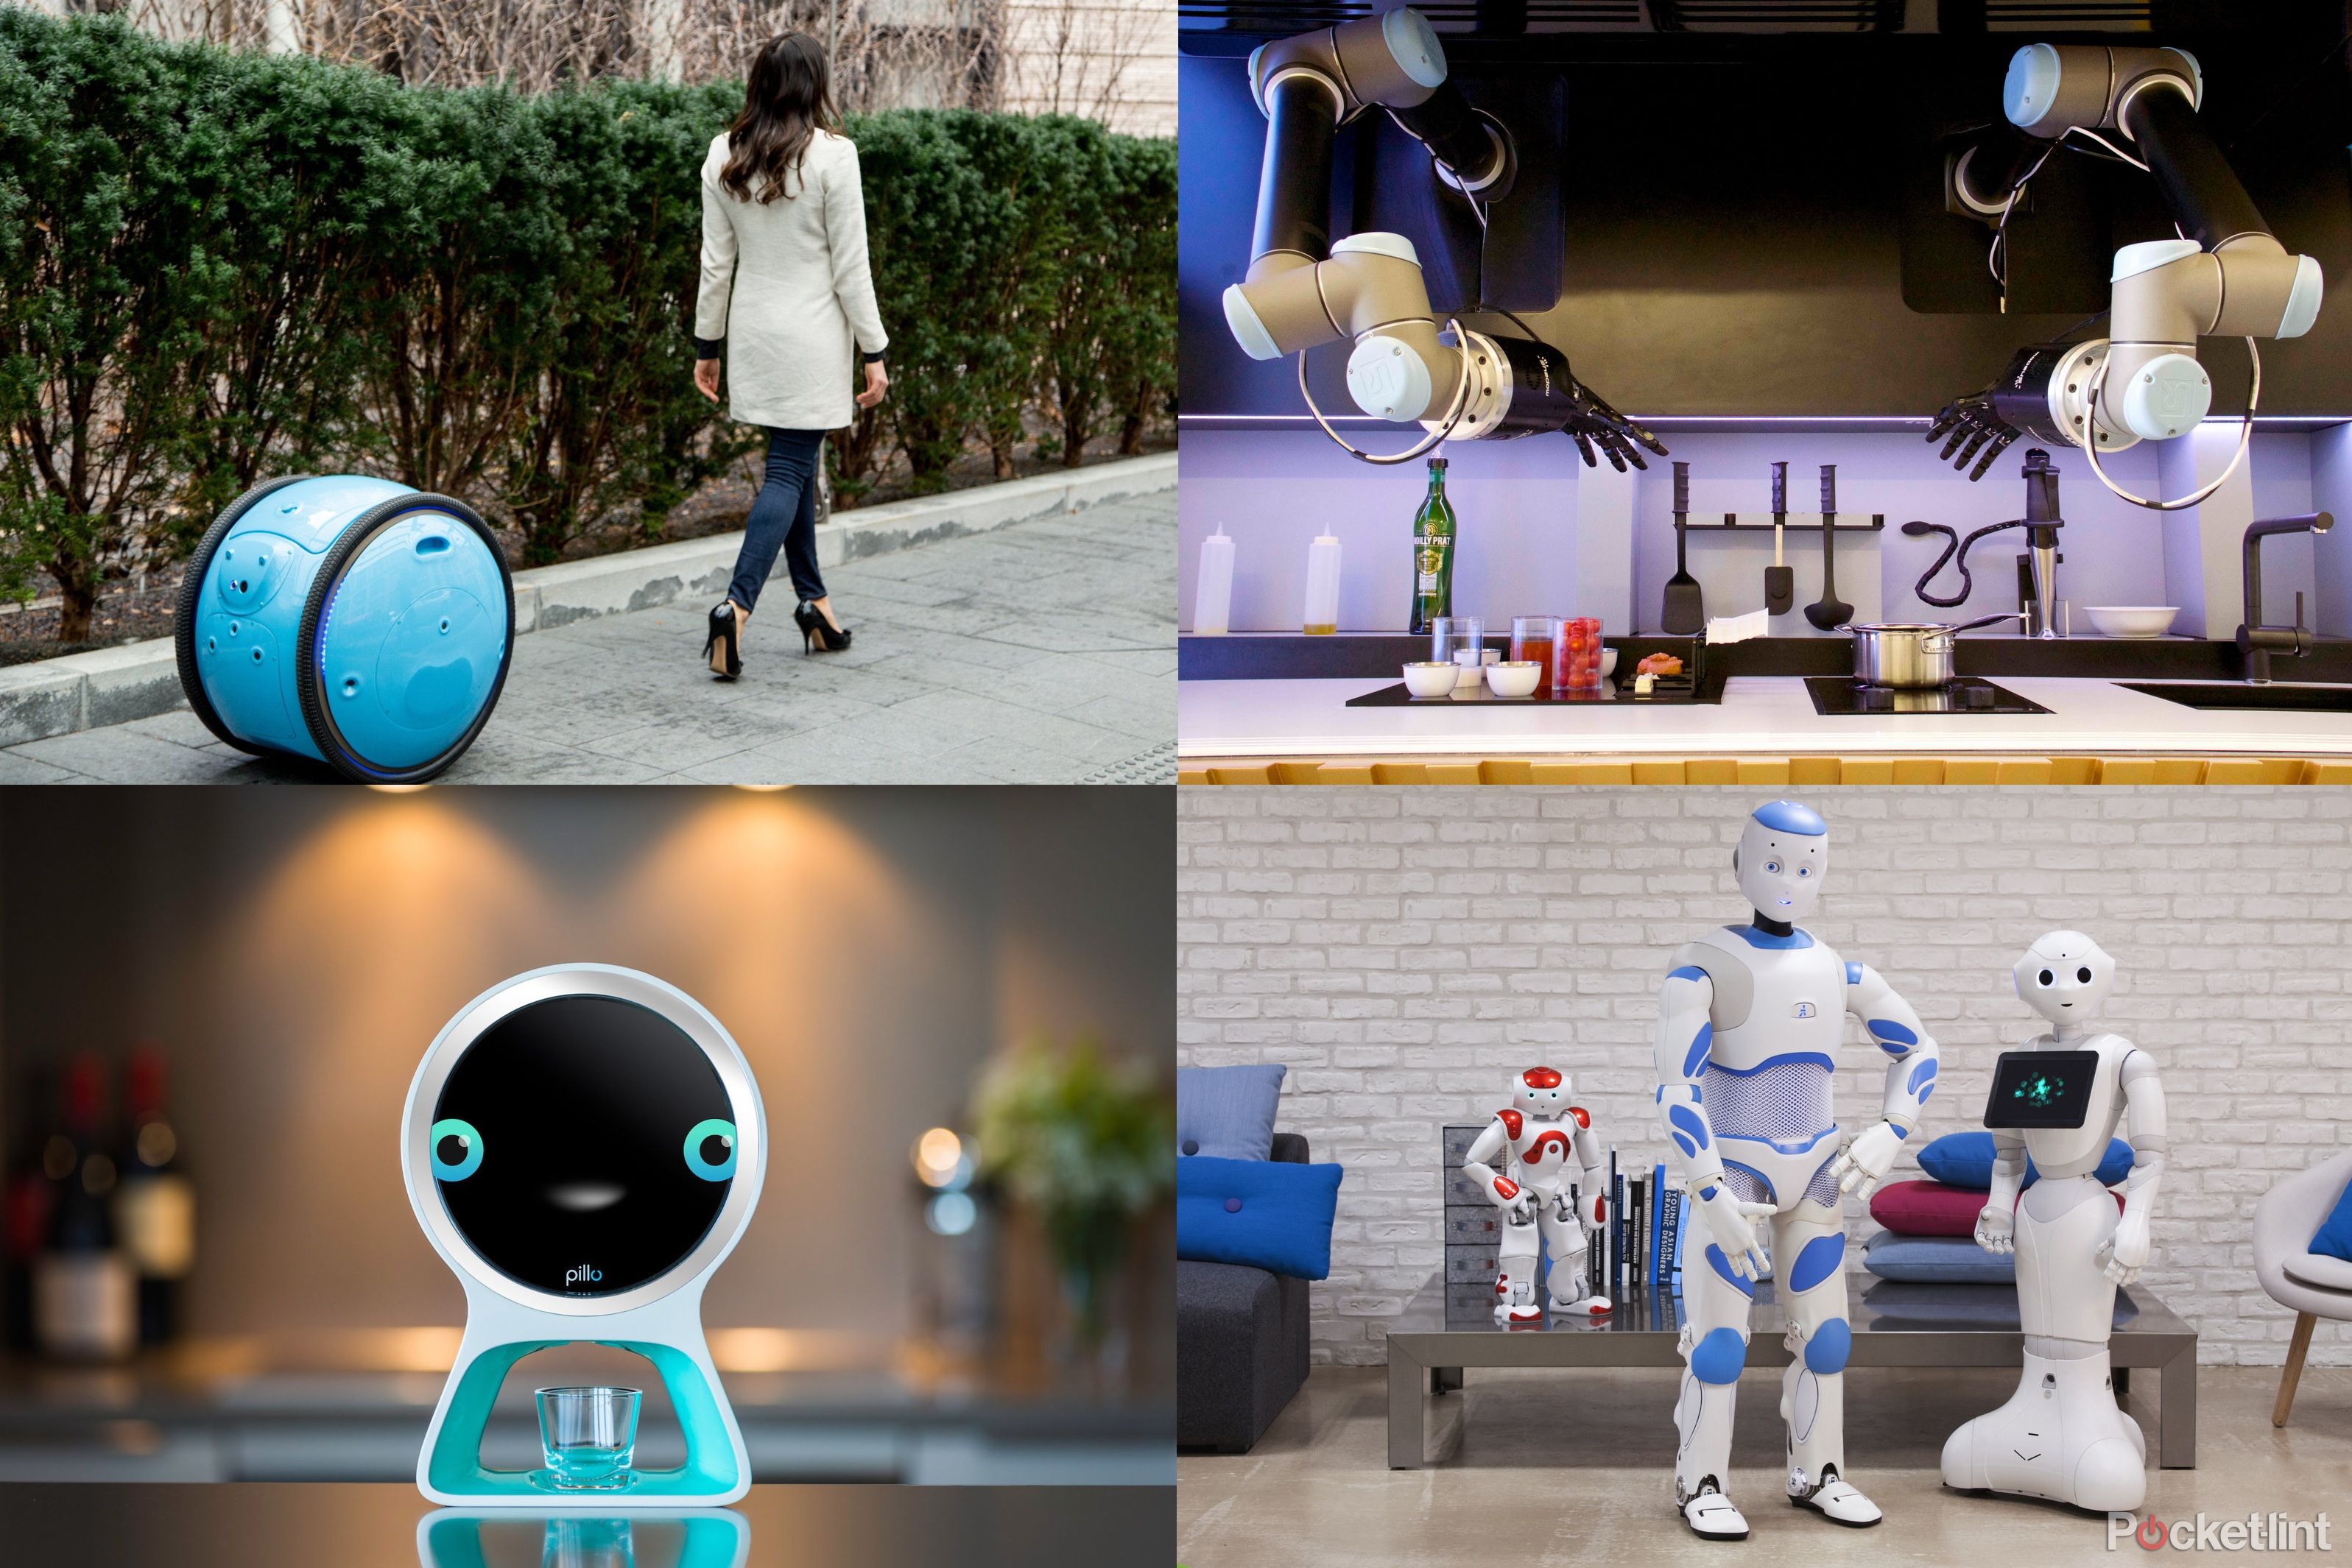 25 Real Robots That Exist Today: Real-Life Robots in Everyday Life